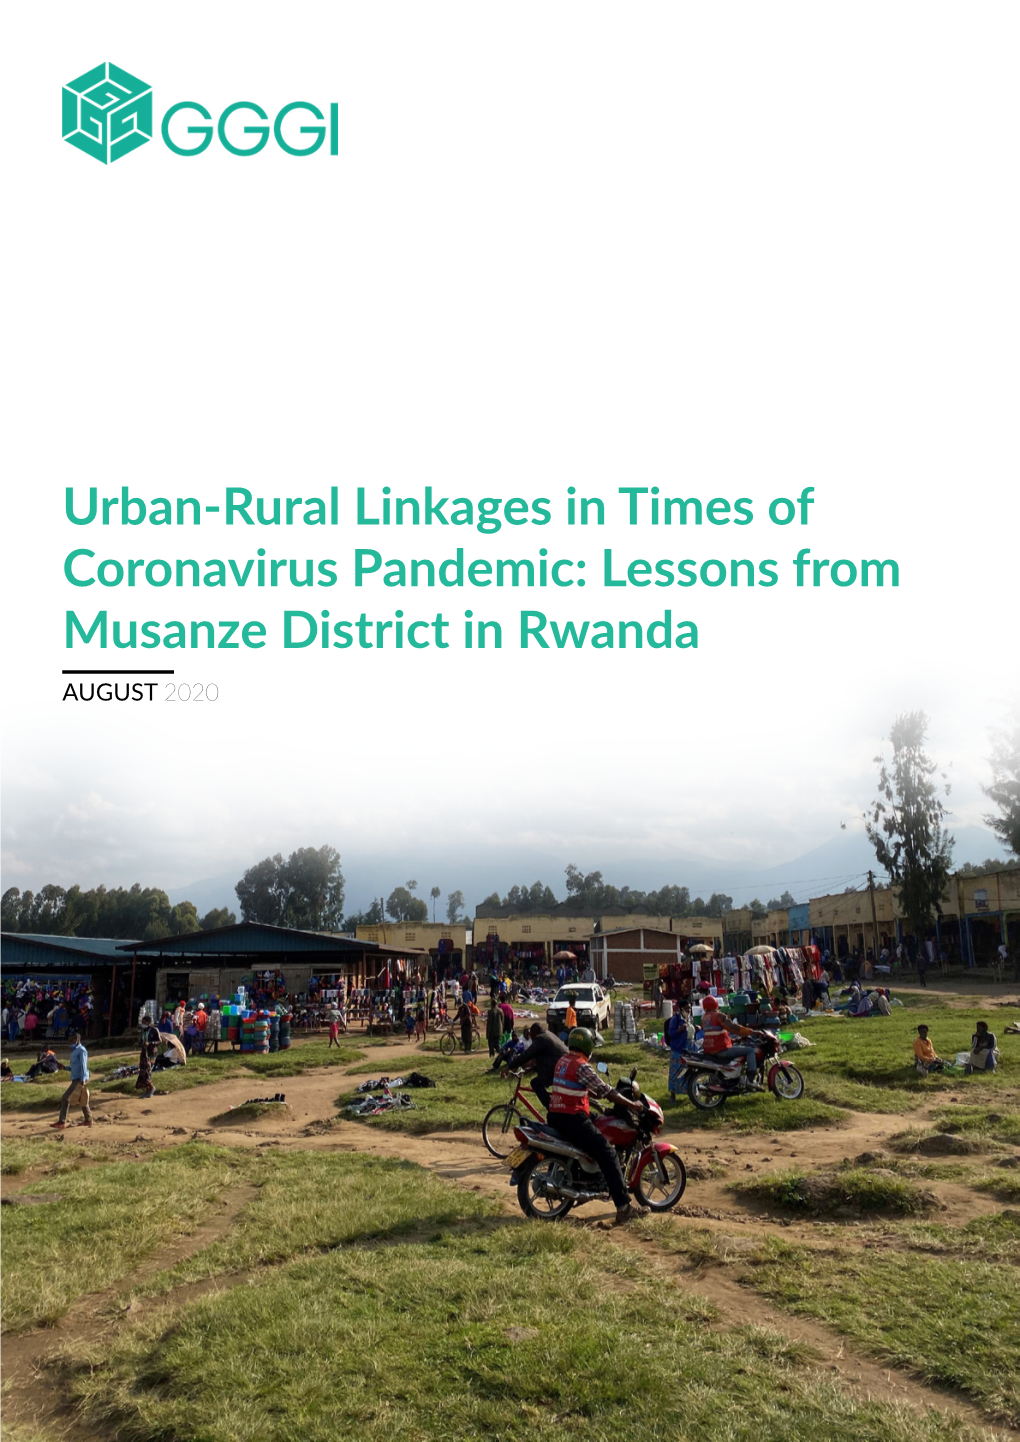 Urban-Rural Linkages in Times of Coronavirus Pandemic: Lessons from Musanze District in Rwanda AUGUST 2020